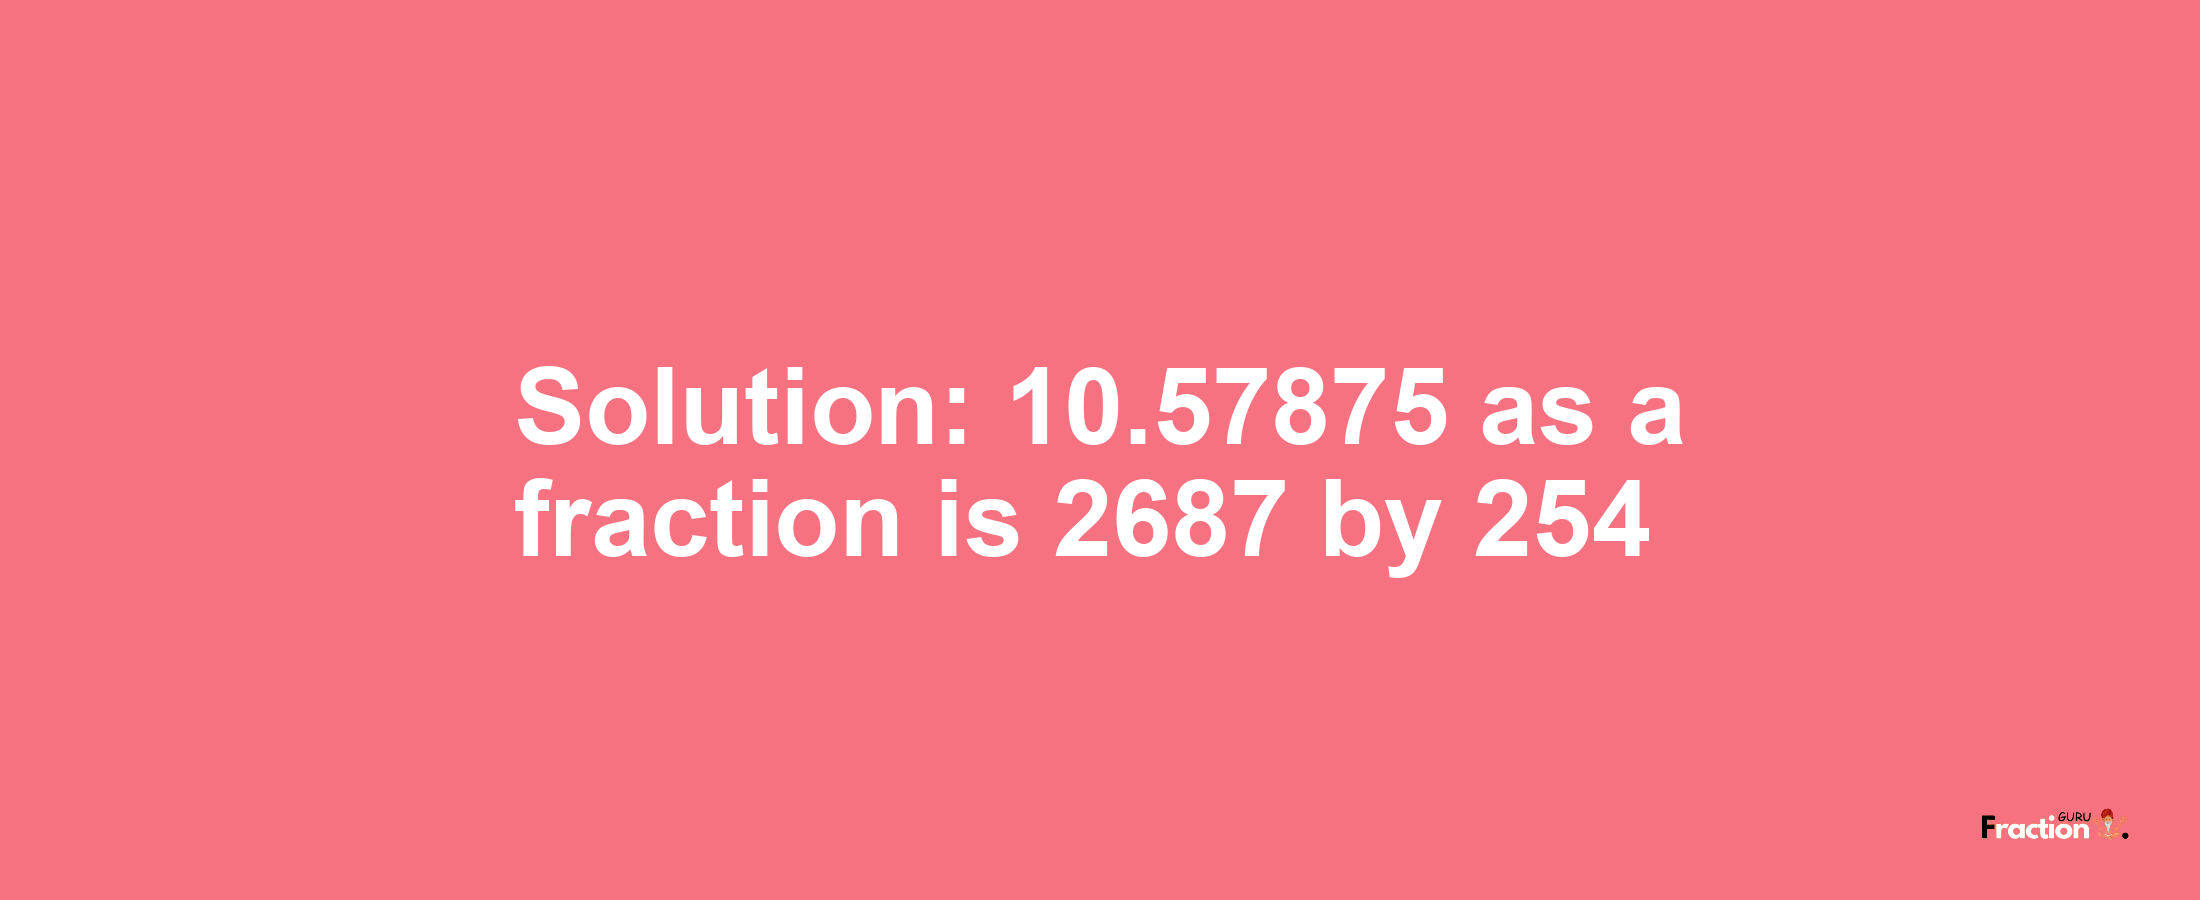 Solution:10.57875 as a fraction is 2687/254